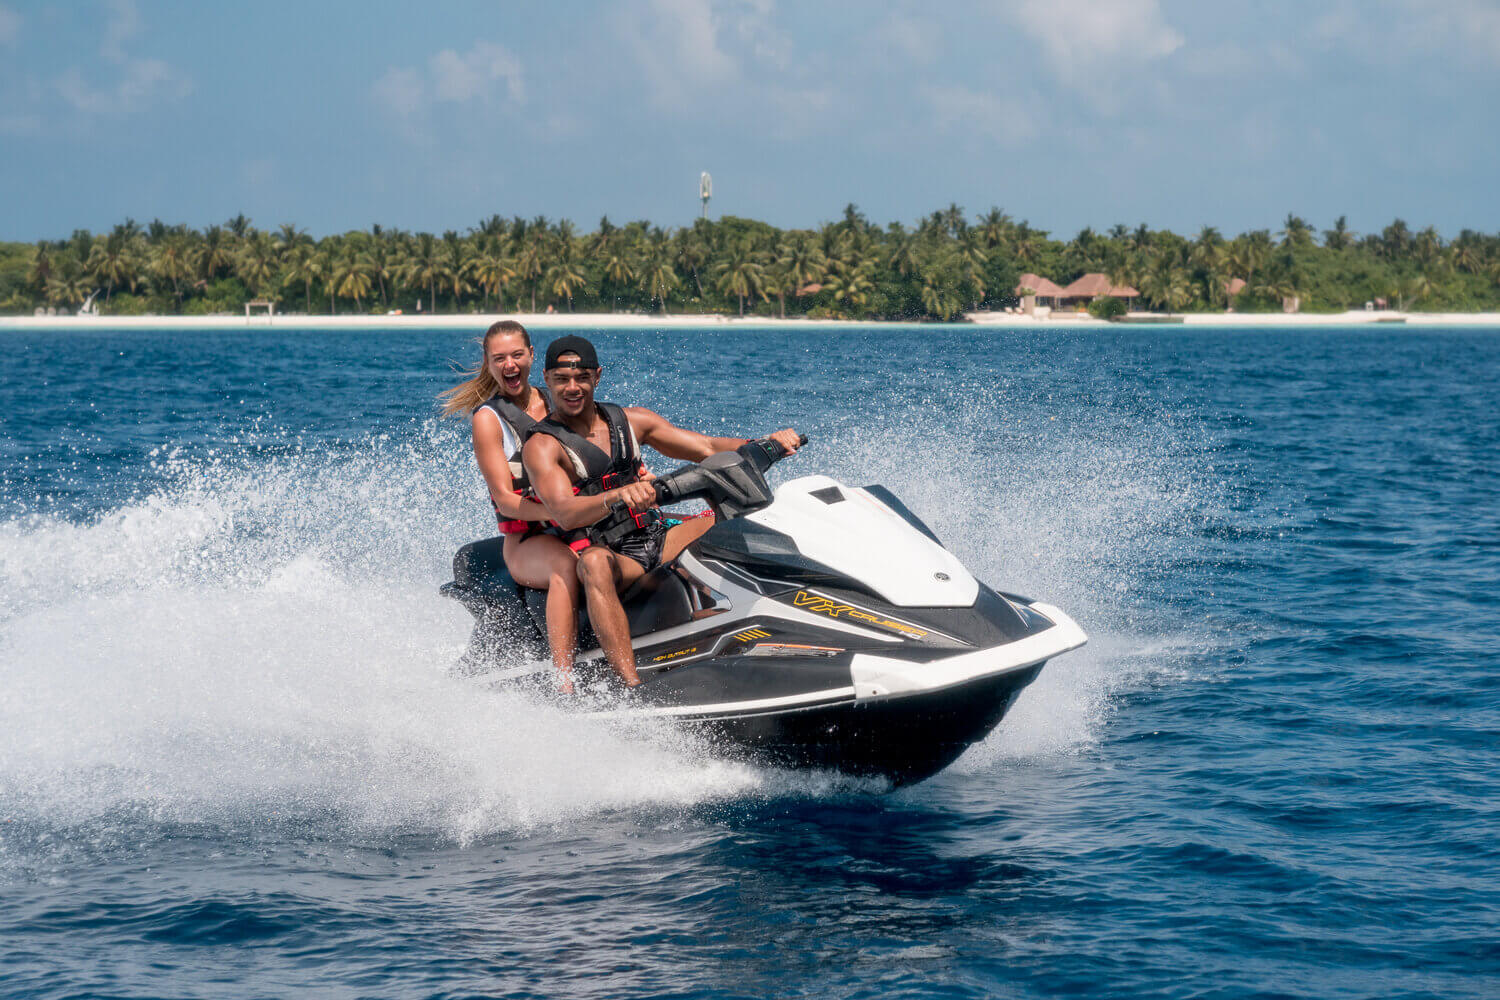 Water sports in the Maldives: which hotels to choose